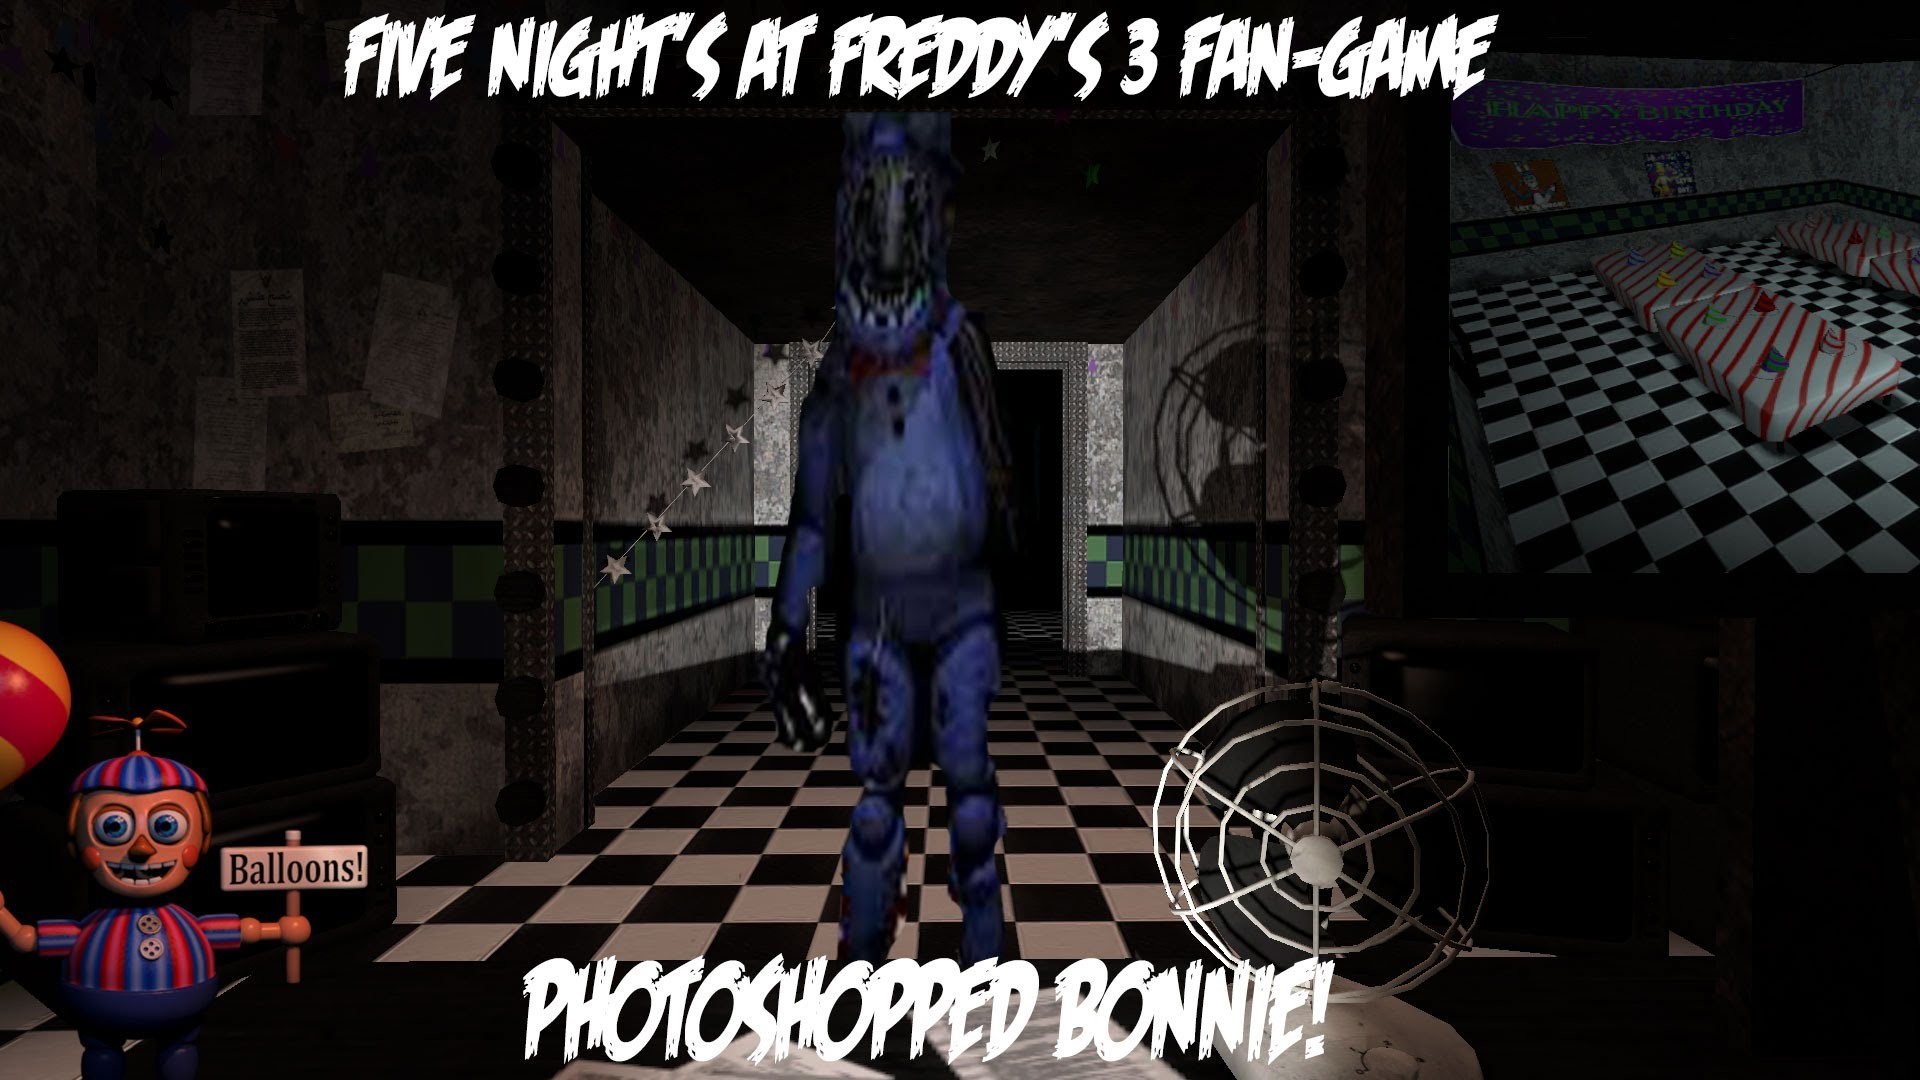 1920x1080 CREEPY PHOTOSHOPPED BONNIE!| Five Night's At Freddy's 3 Fan-made - YouTube